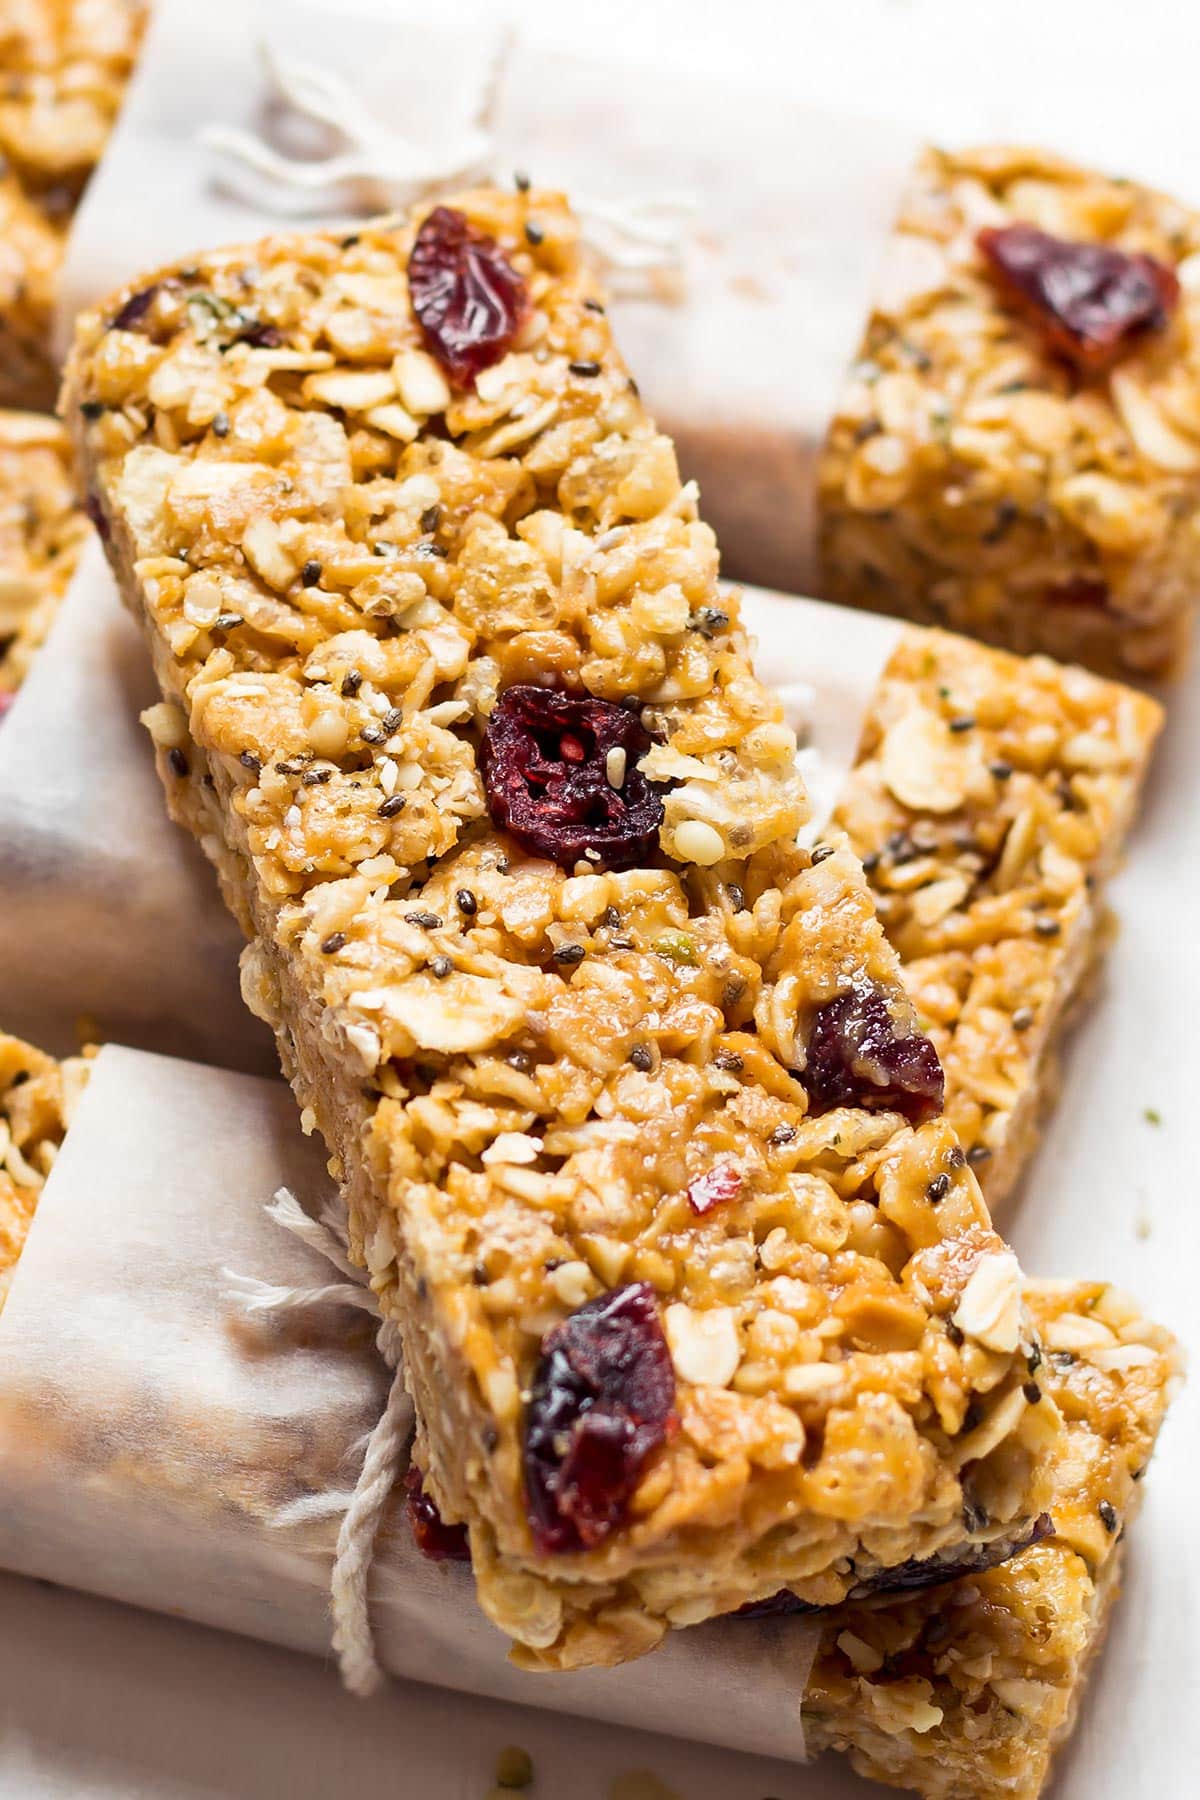 Healthy Homemade Granola Bars with seeds and dried fruit